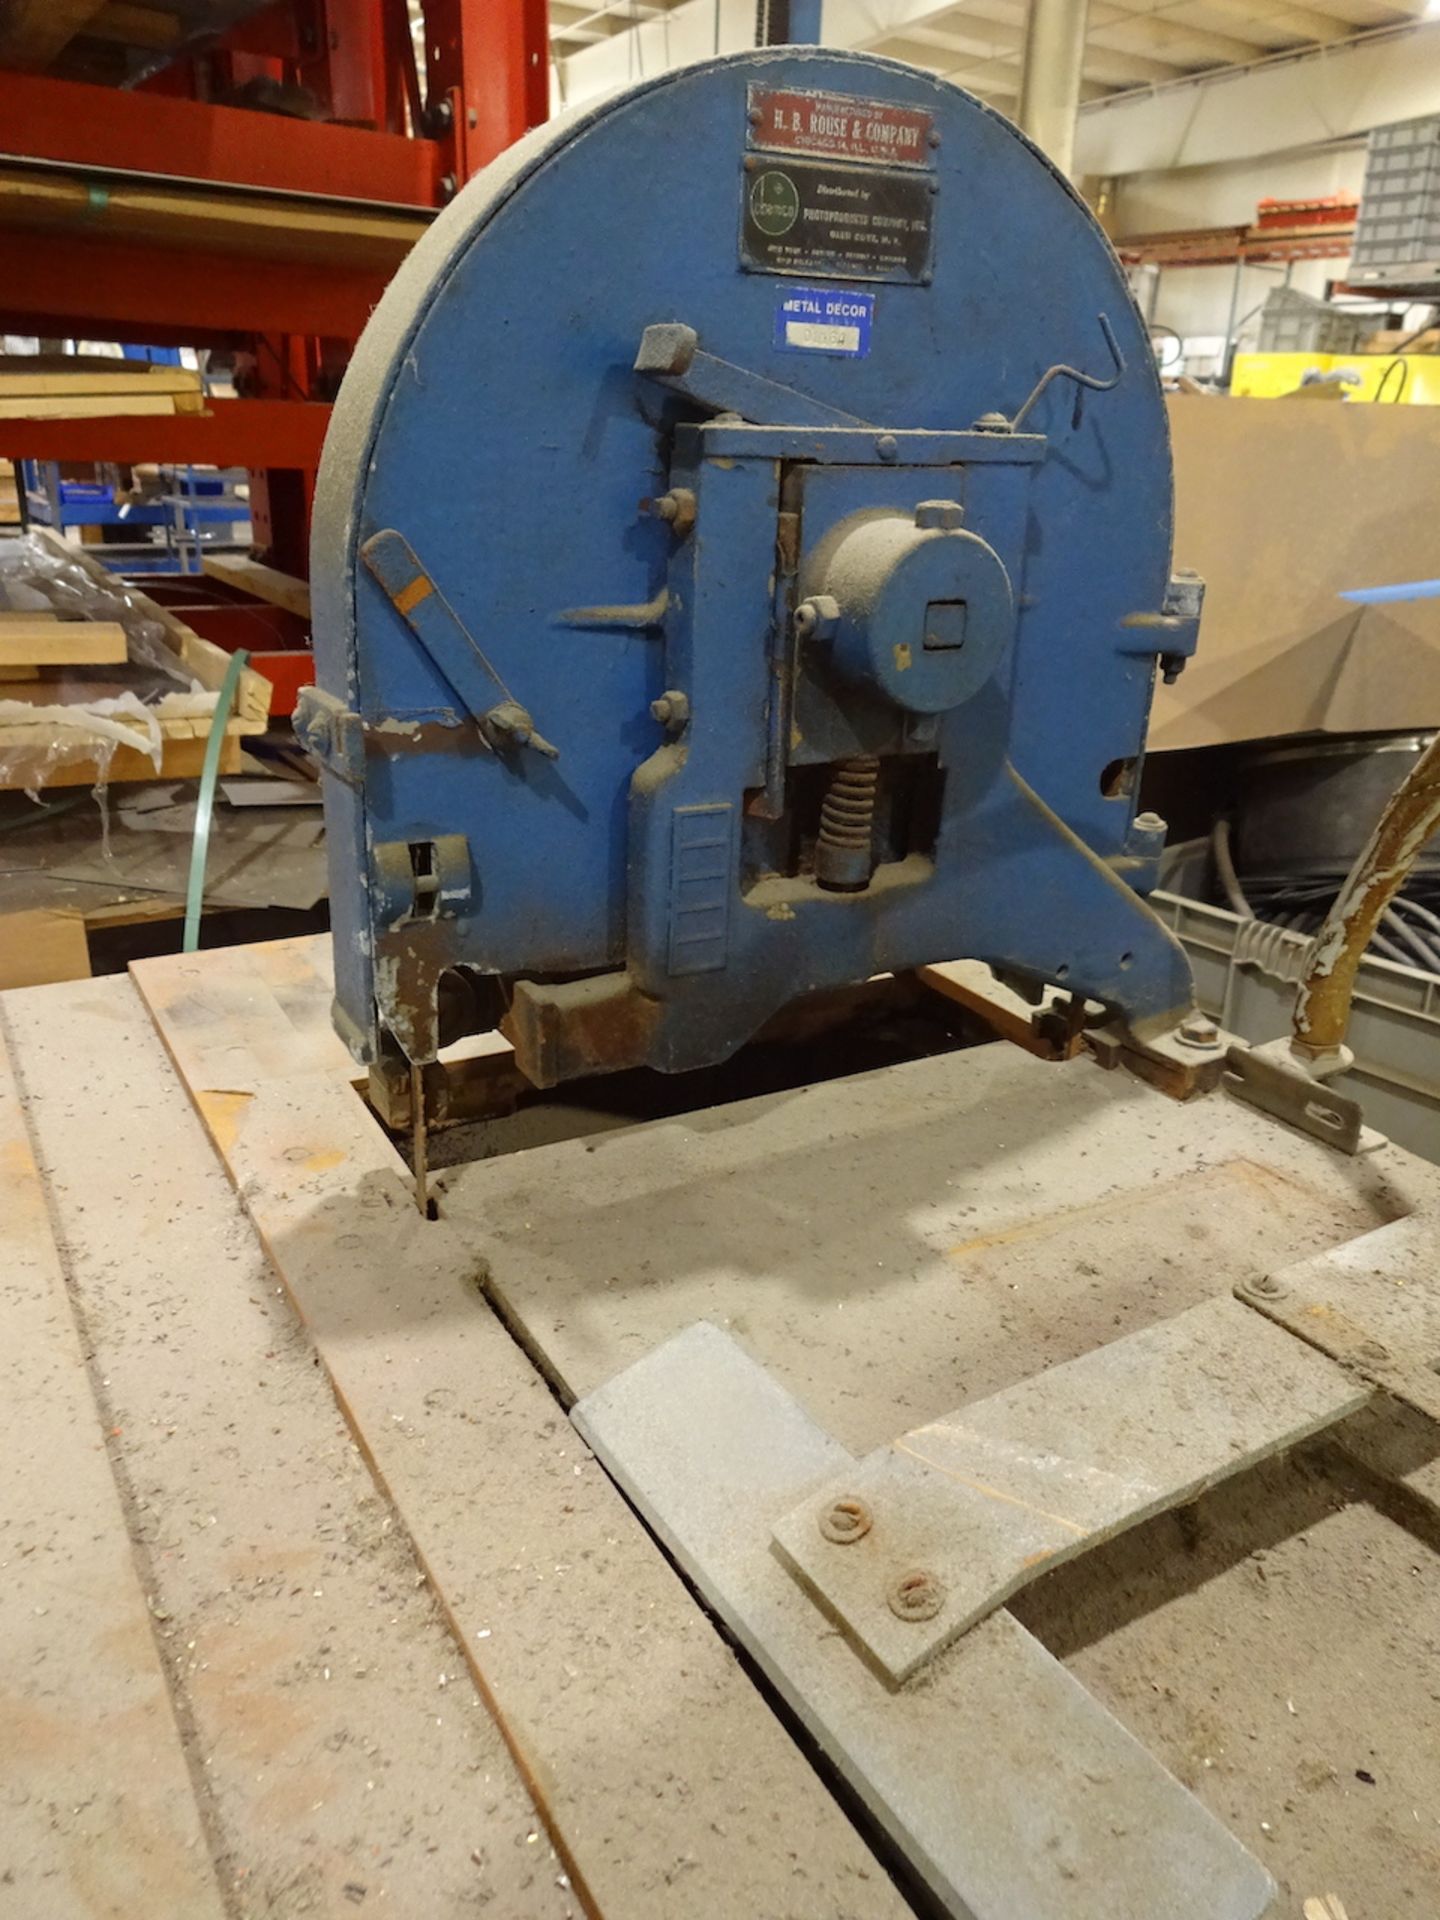 H.B. Rouse 12 in. Band Saw - Image 2 of 2